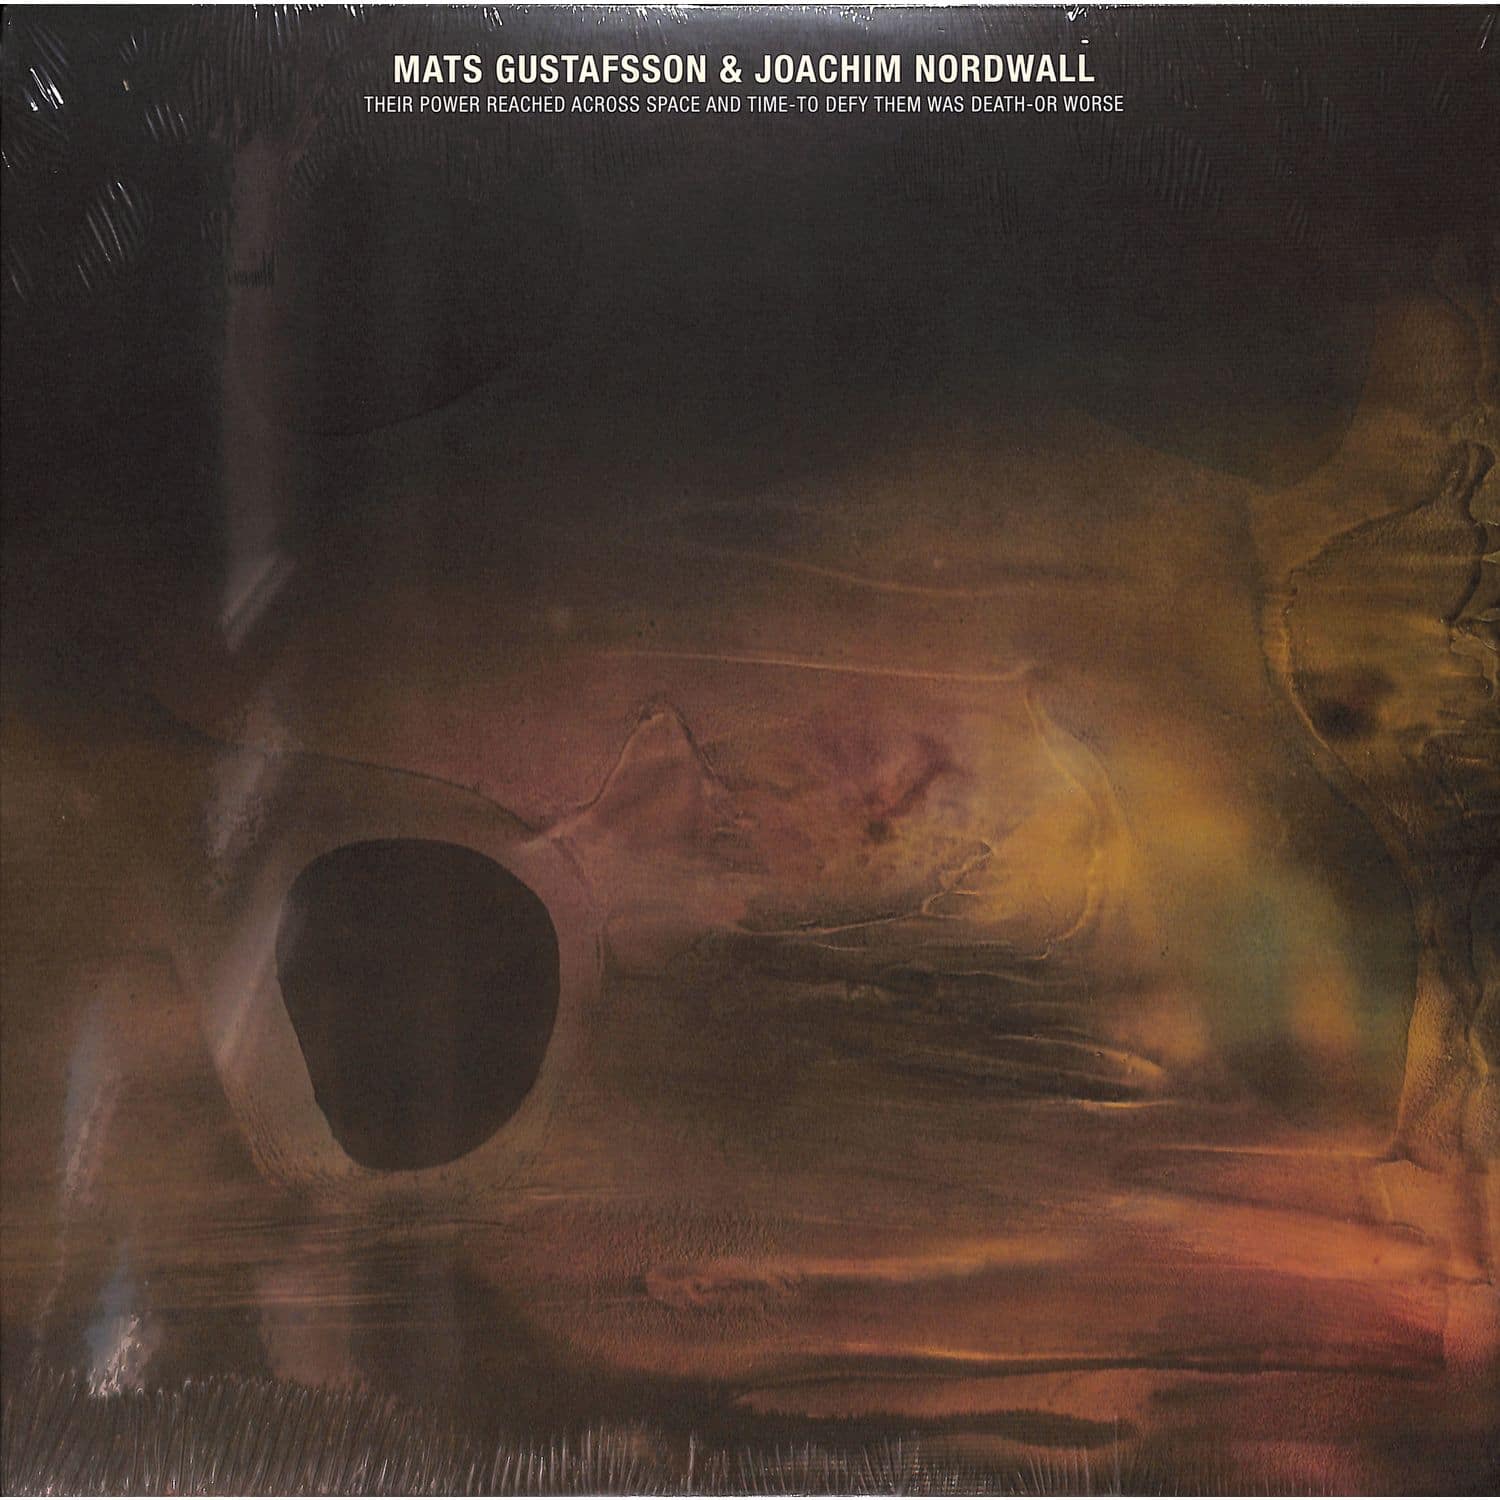 Mats Gustafsson & Joachim Nordwall - THEIR POWER REACHED ACROSS SPACE AND TIME... 